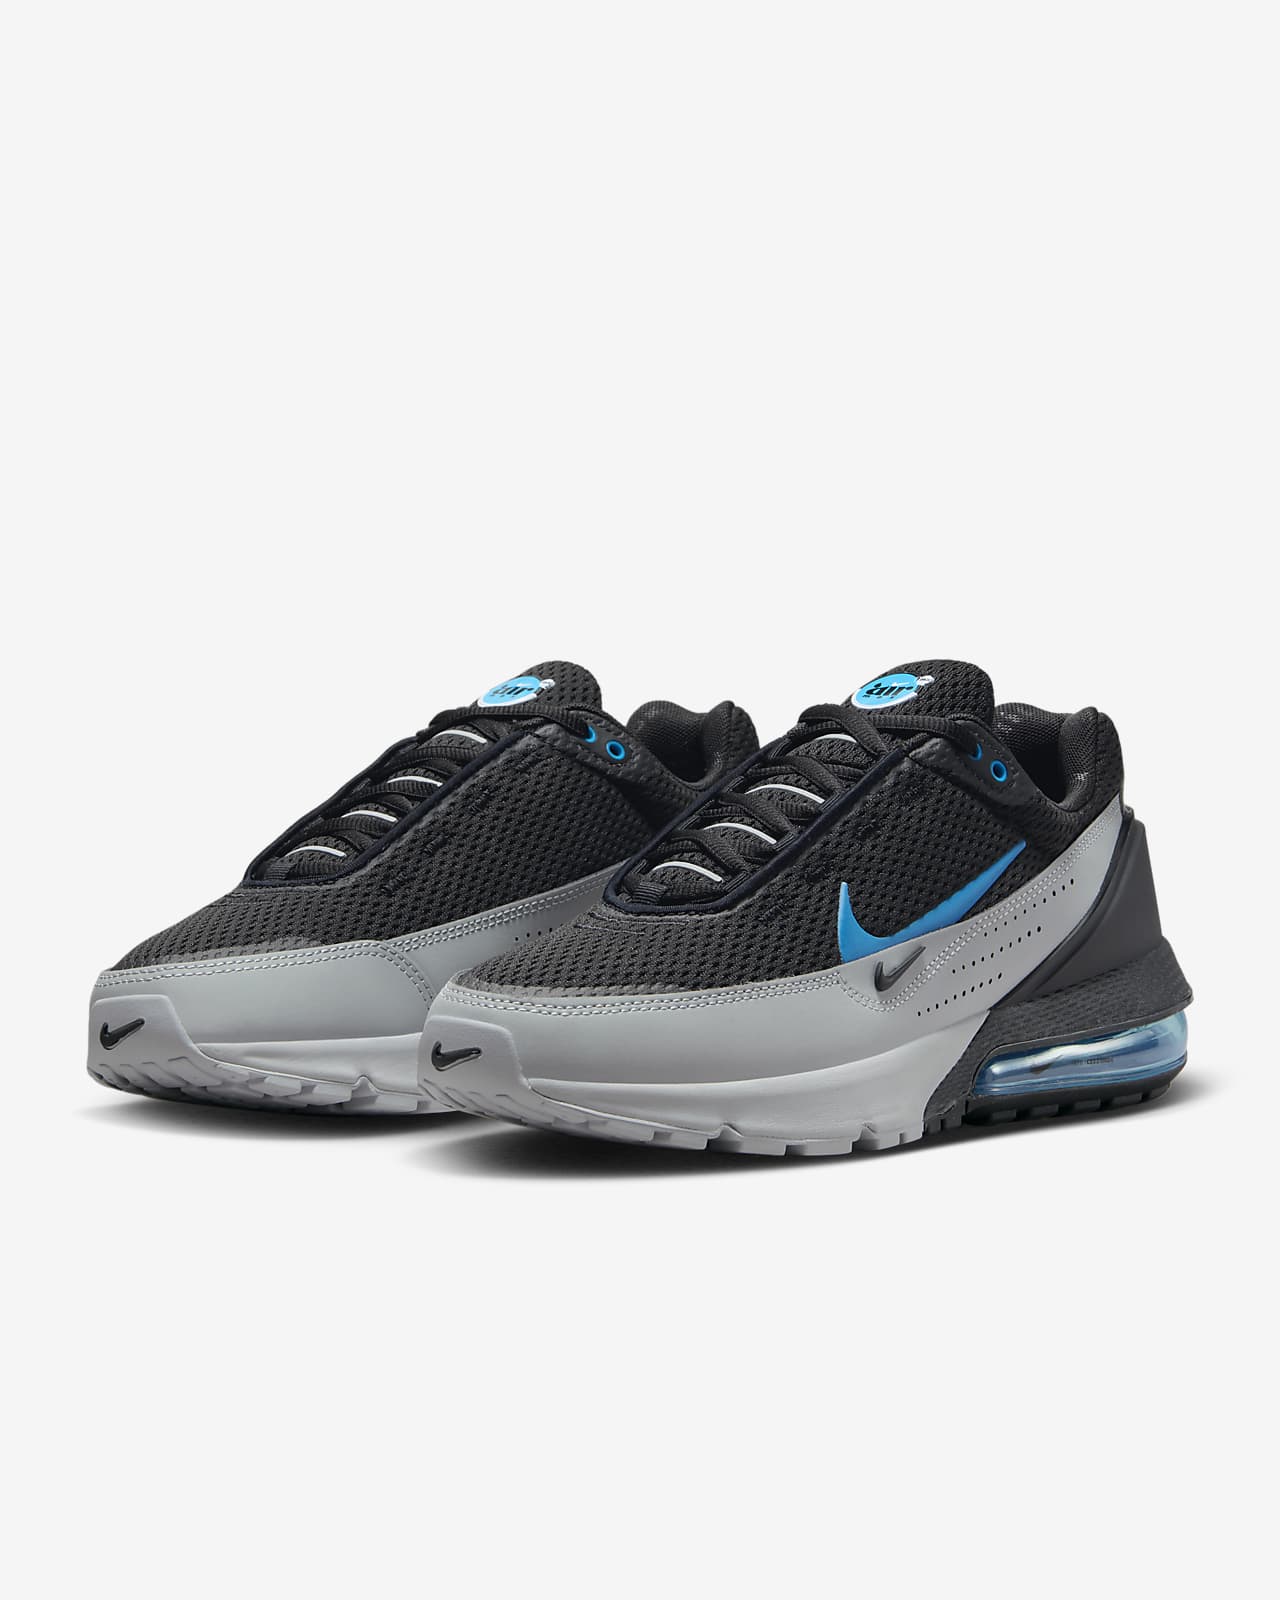 Men's Trainers & Shoes. Nike CA